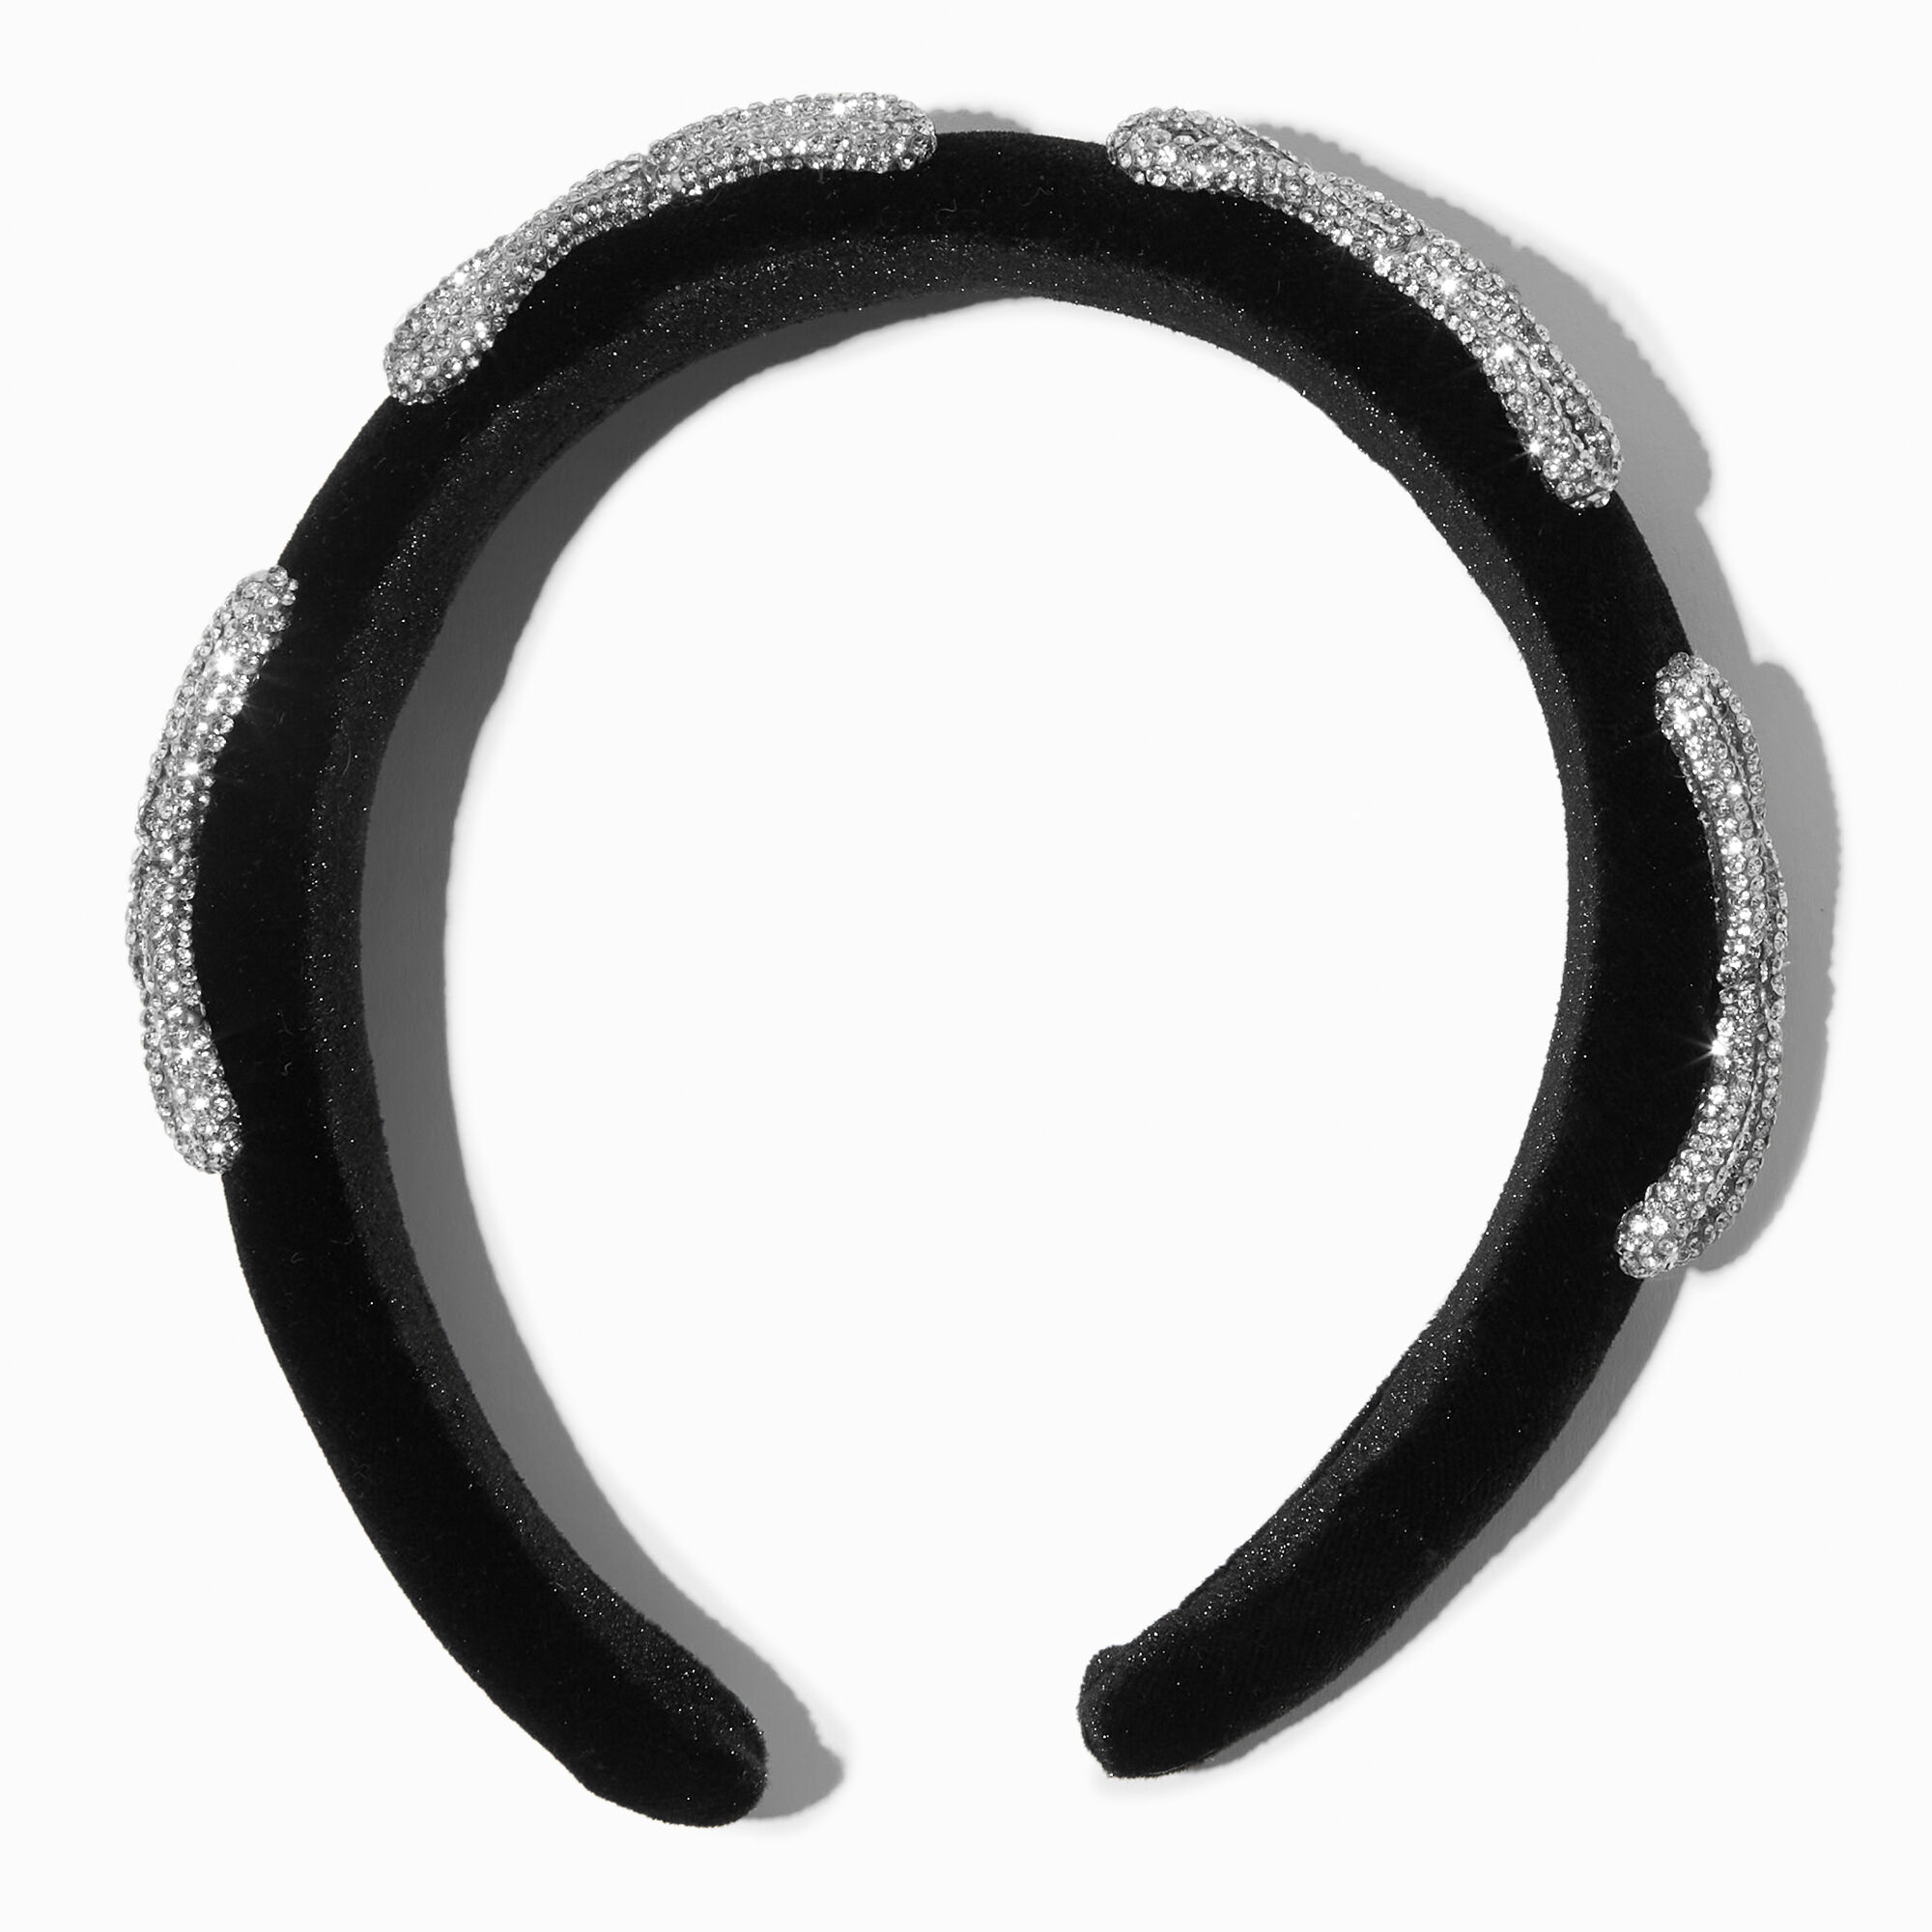 View Claires Bow Embellished Puffy Headband Black information